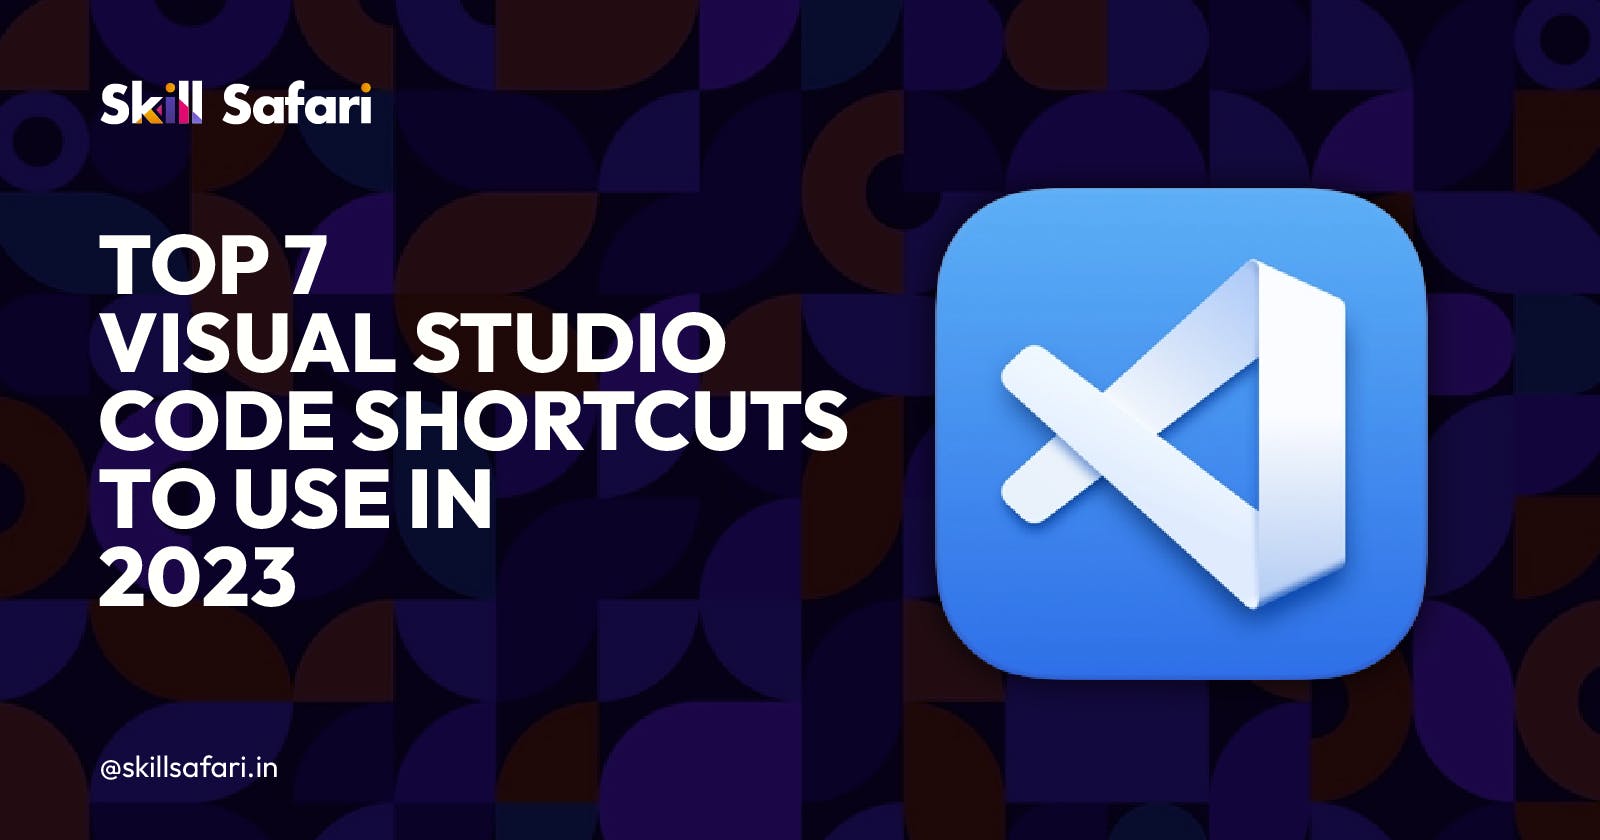 Top 7 Visual Studio Code Shortcuts To Use  in 2023